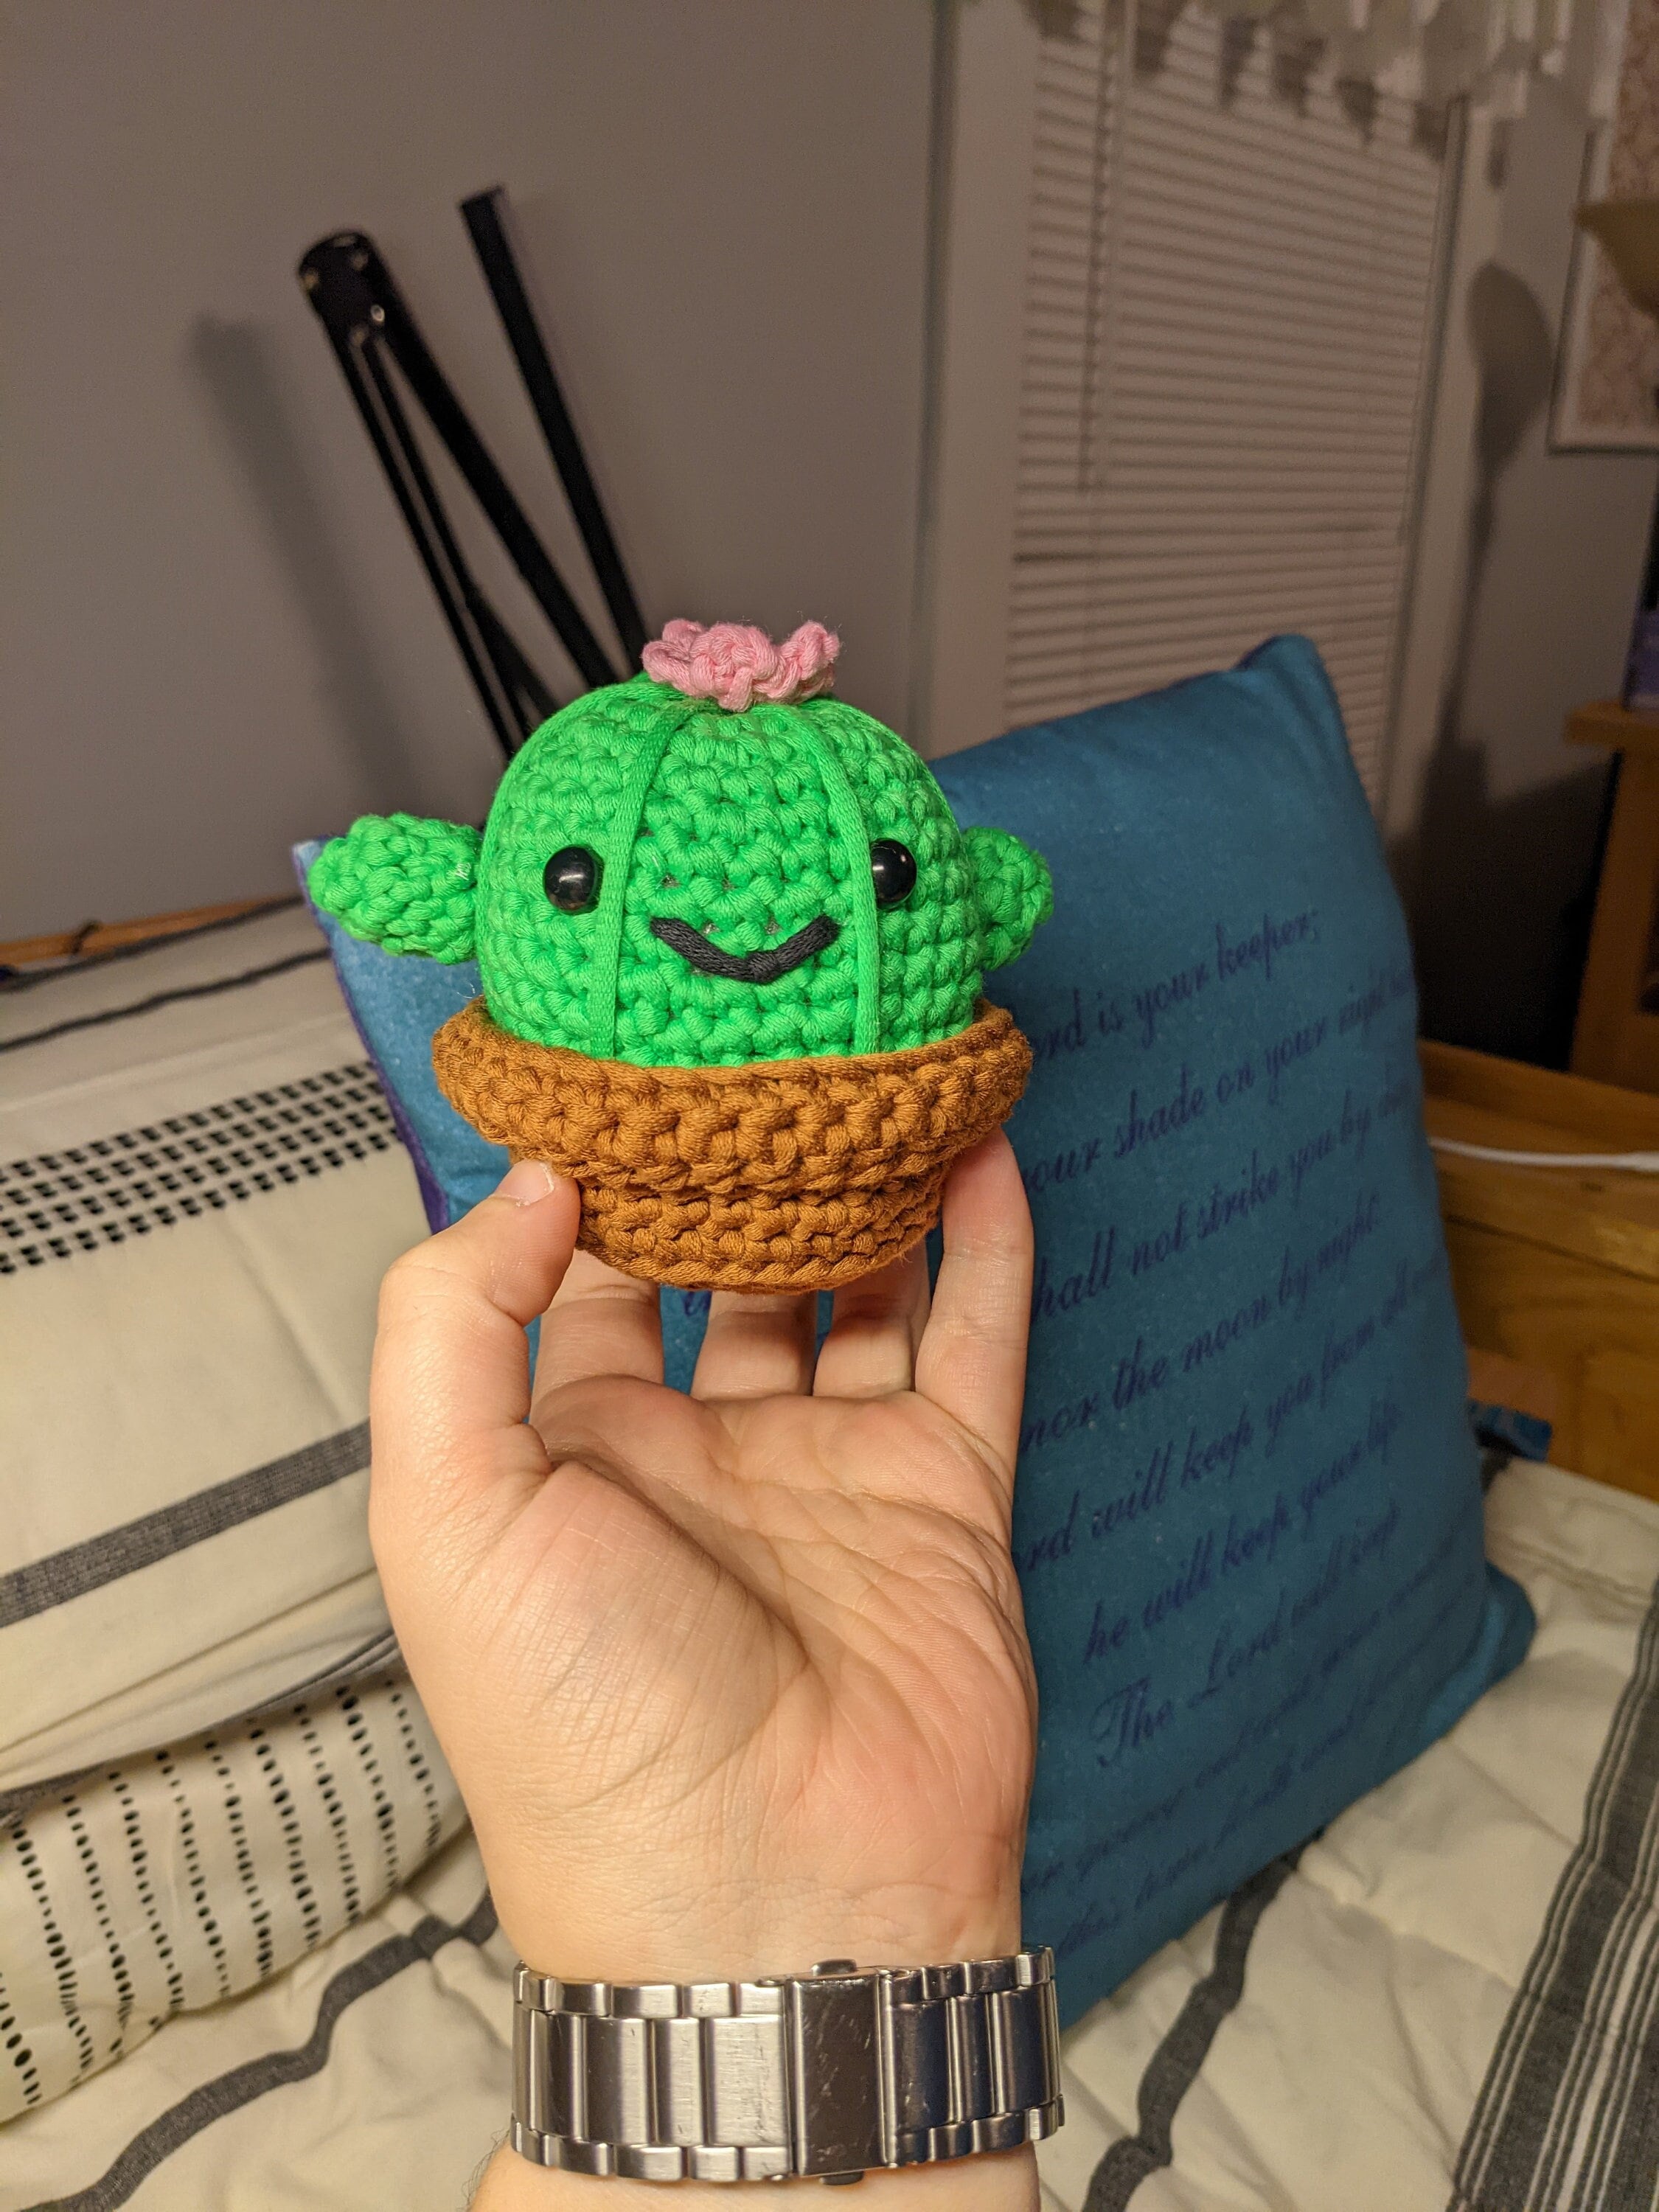 Meet Clint the Cactus! 🥰🌵 #thewoobles